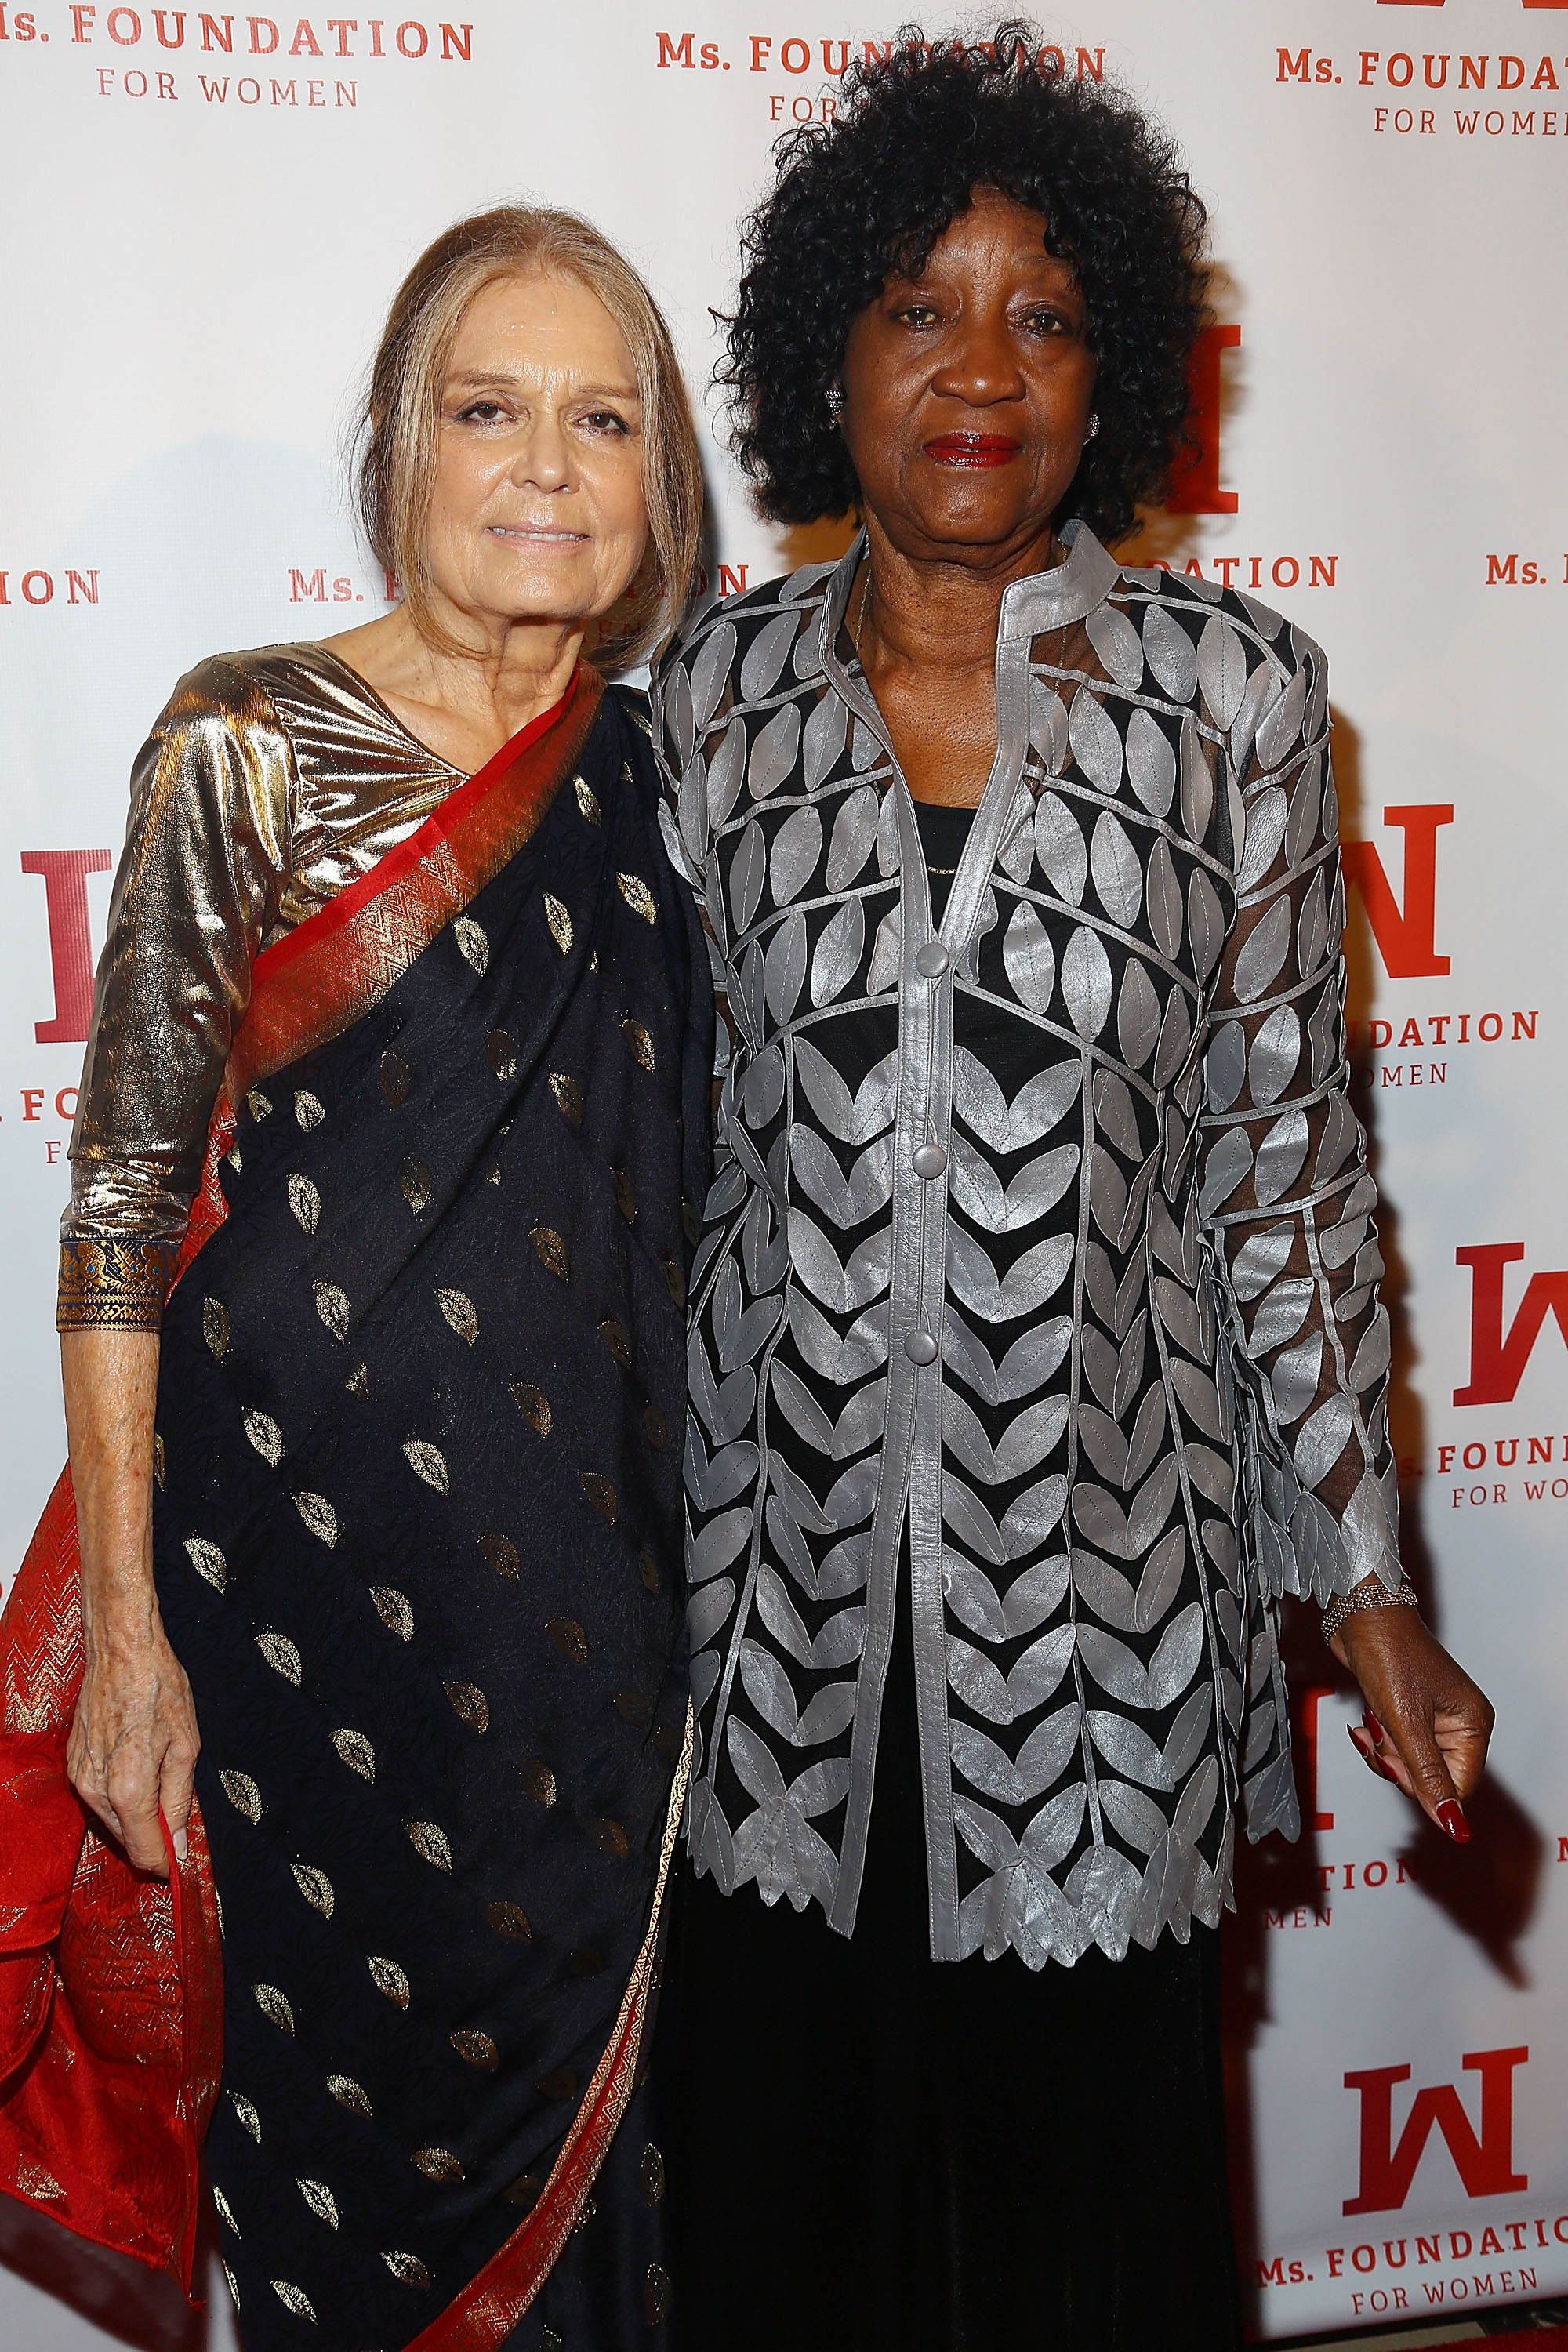 NEW YORK, NY - MAY 01: (L-R) Gloria Steinem and Dorothy Pitman Hughes attend the Ms. Foundation Women Of Vision Gala 2014 on May 1, 2014 in New York City. (Photo by Astrid Stawiarz/Getty Images for Ms. Foundation For Women) (Astrid Stawiarz—2014 Getty Images)